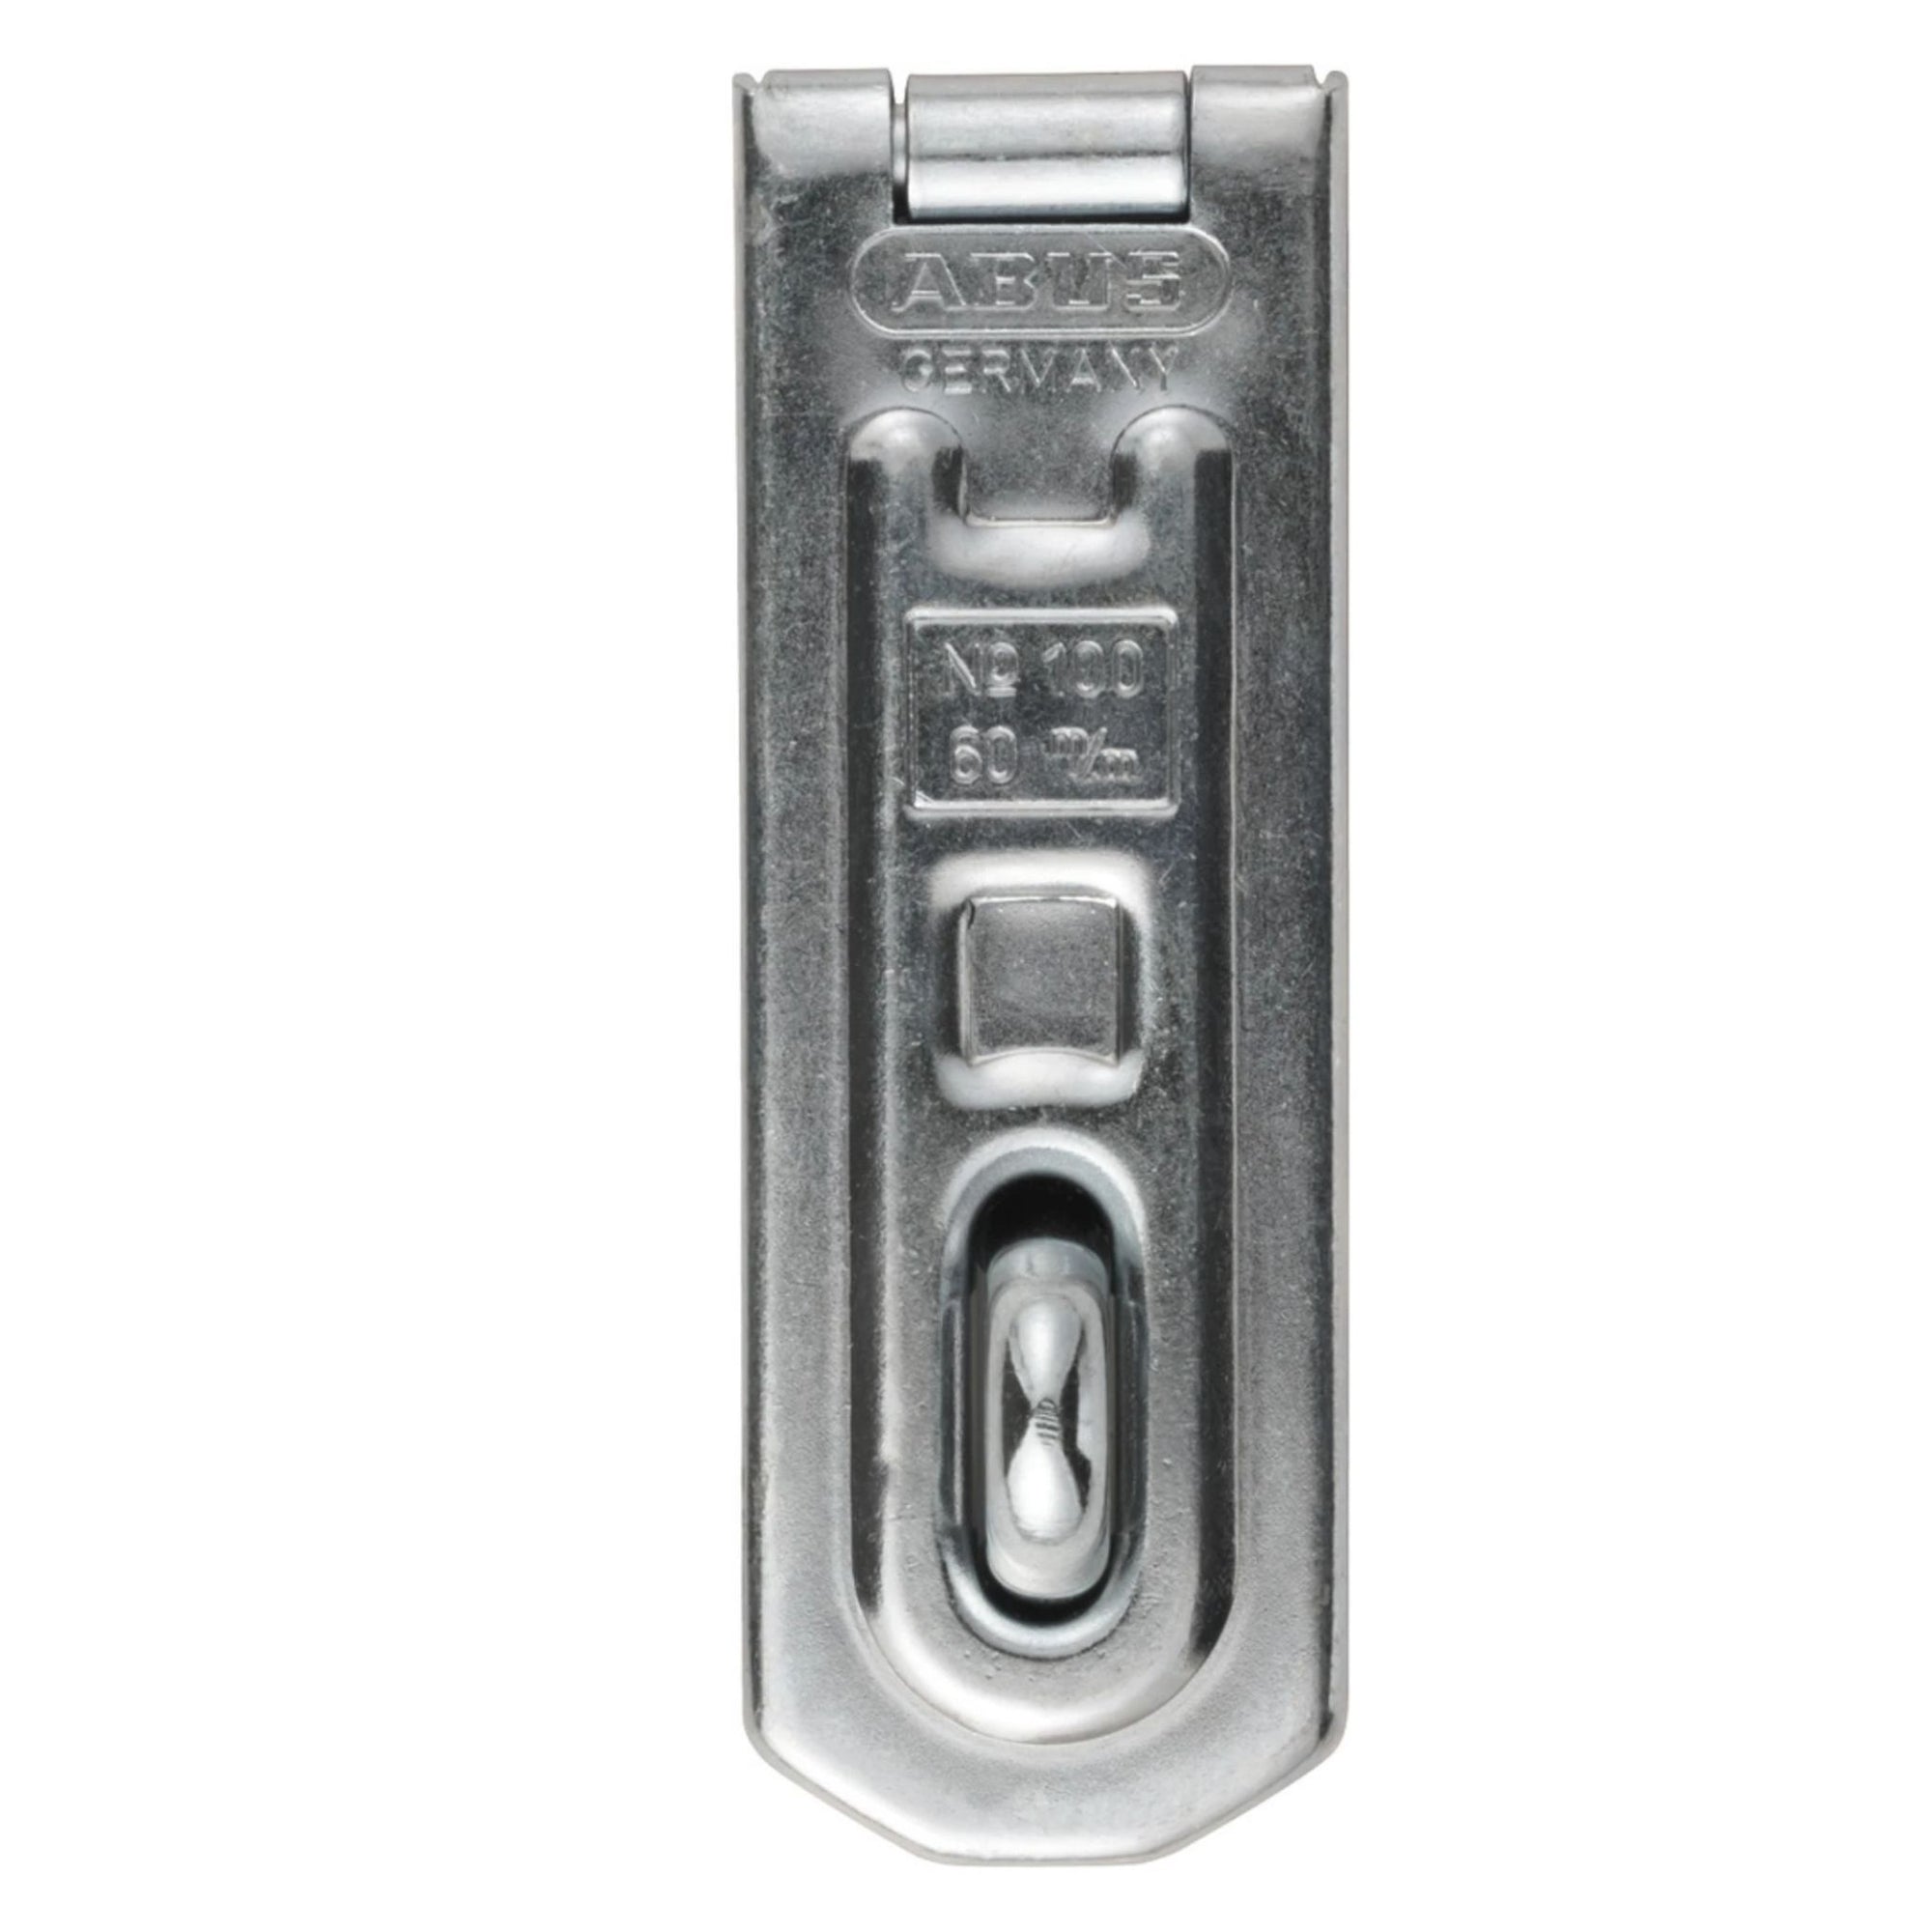 Abus Hasp 100 Series Concealed Hinge Pin Hasps 100/60 Hasp - The Lock Source